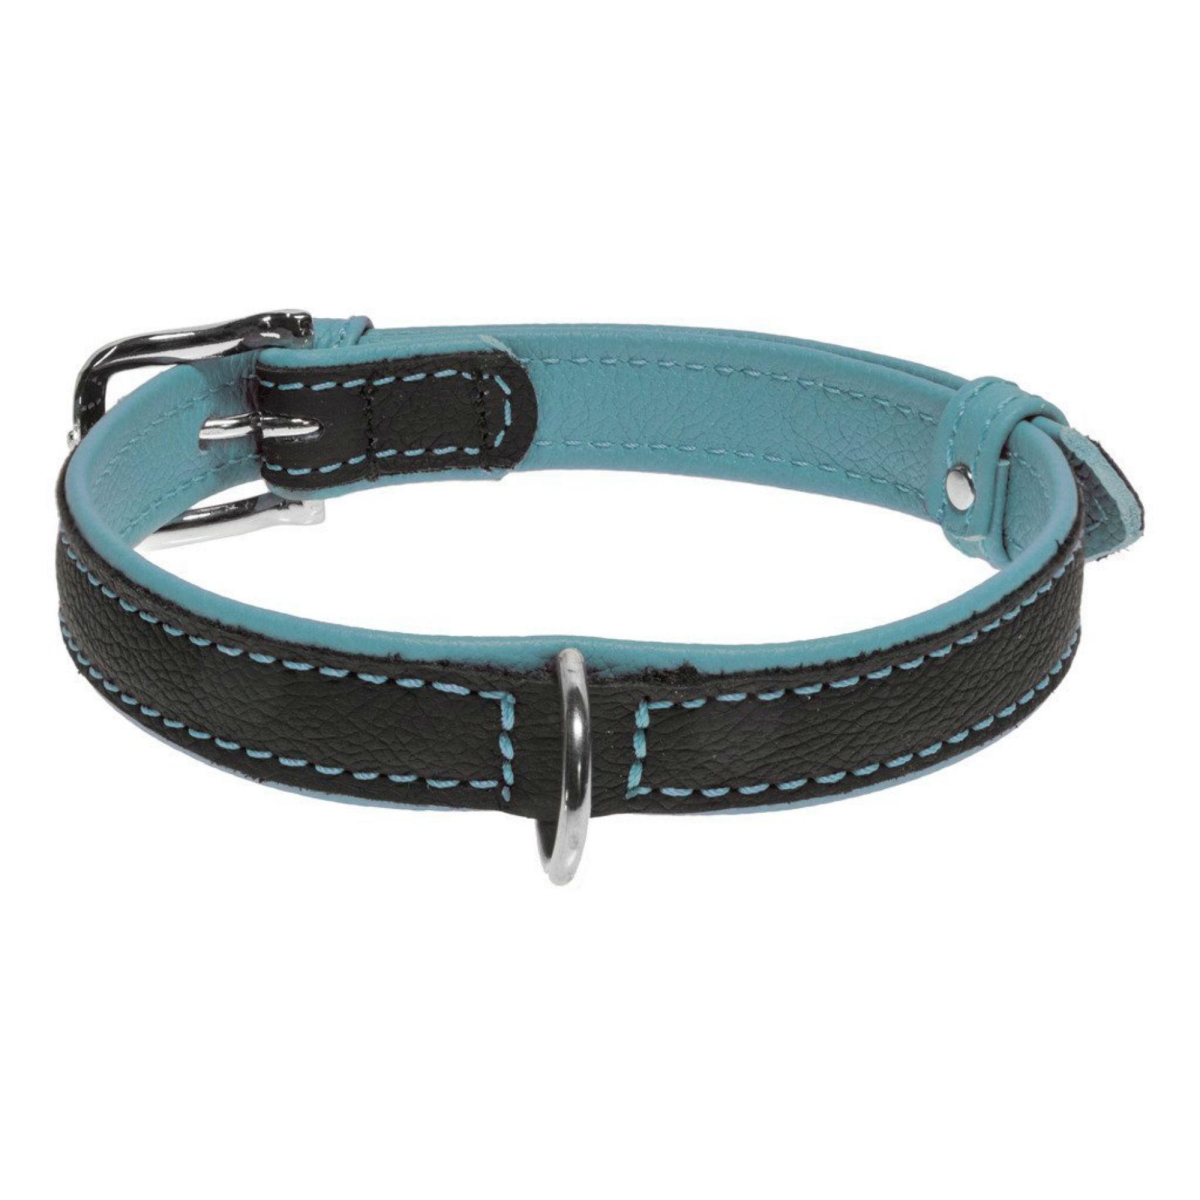 Soft Leather Dual Color Dog Collar, Teal - Large